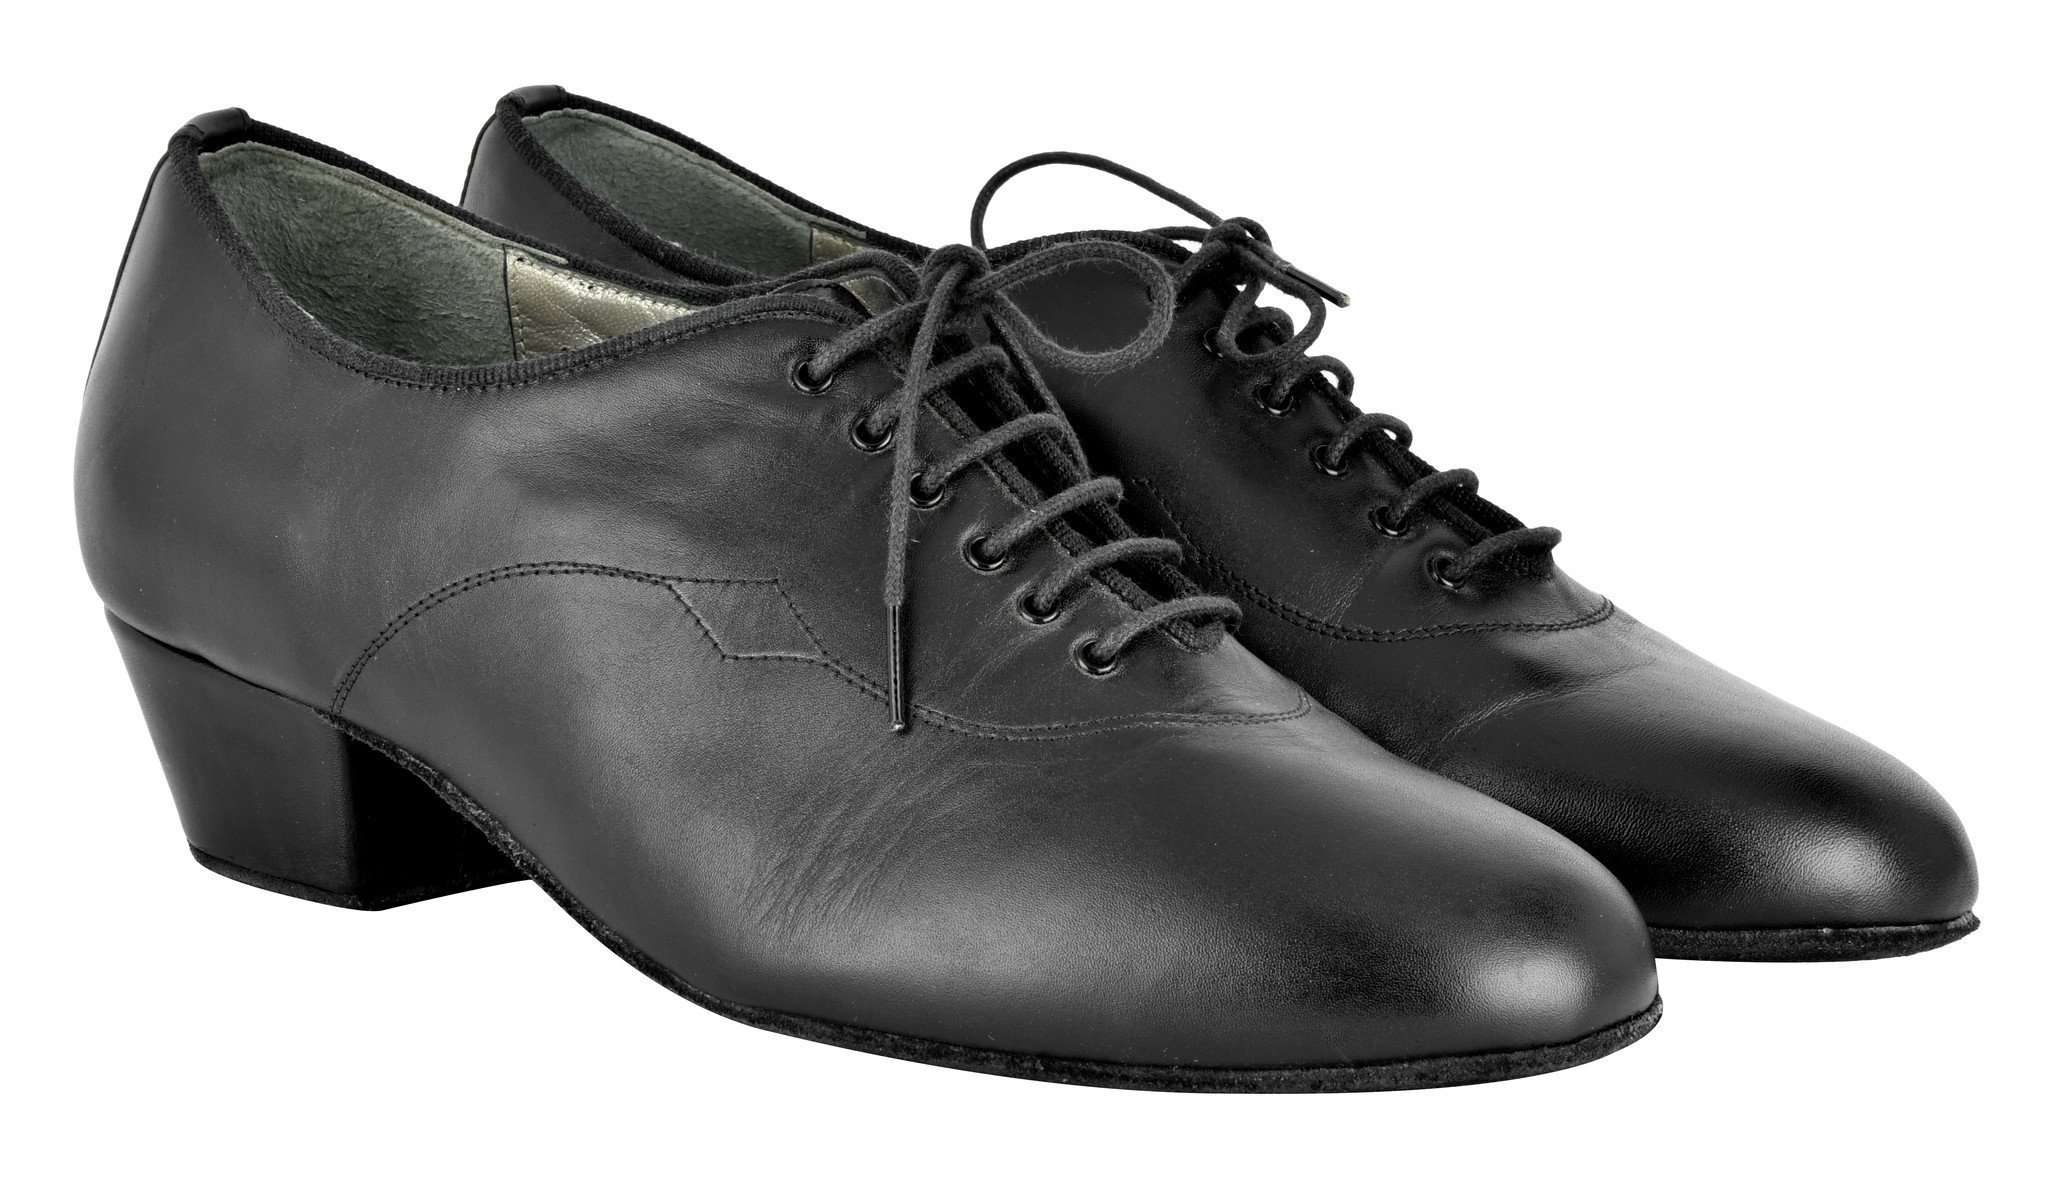 Mens Latin Dance Shoes: GENE in black leather with cotton twill laces